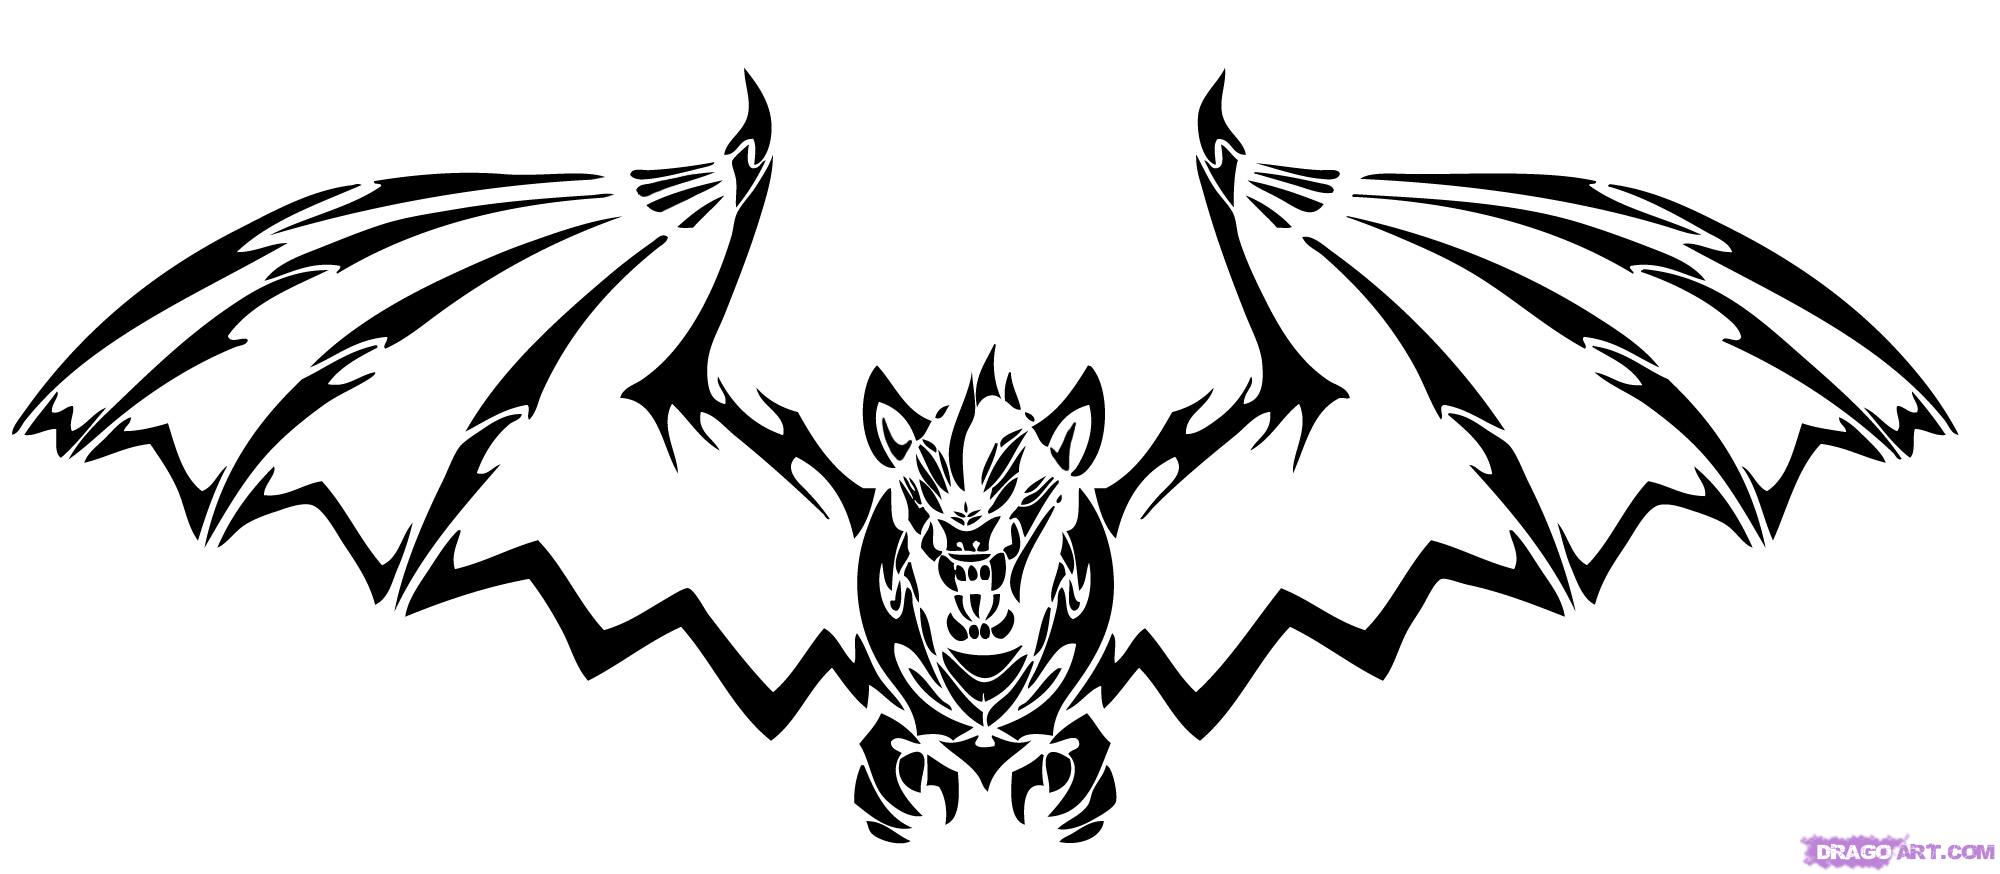 How to Draw a Tribal Bat, Step by Step, Tribal Art, Pop Culture ...